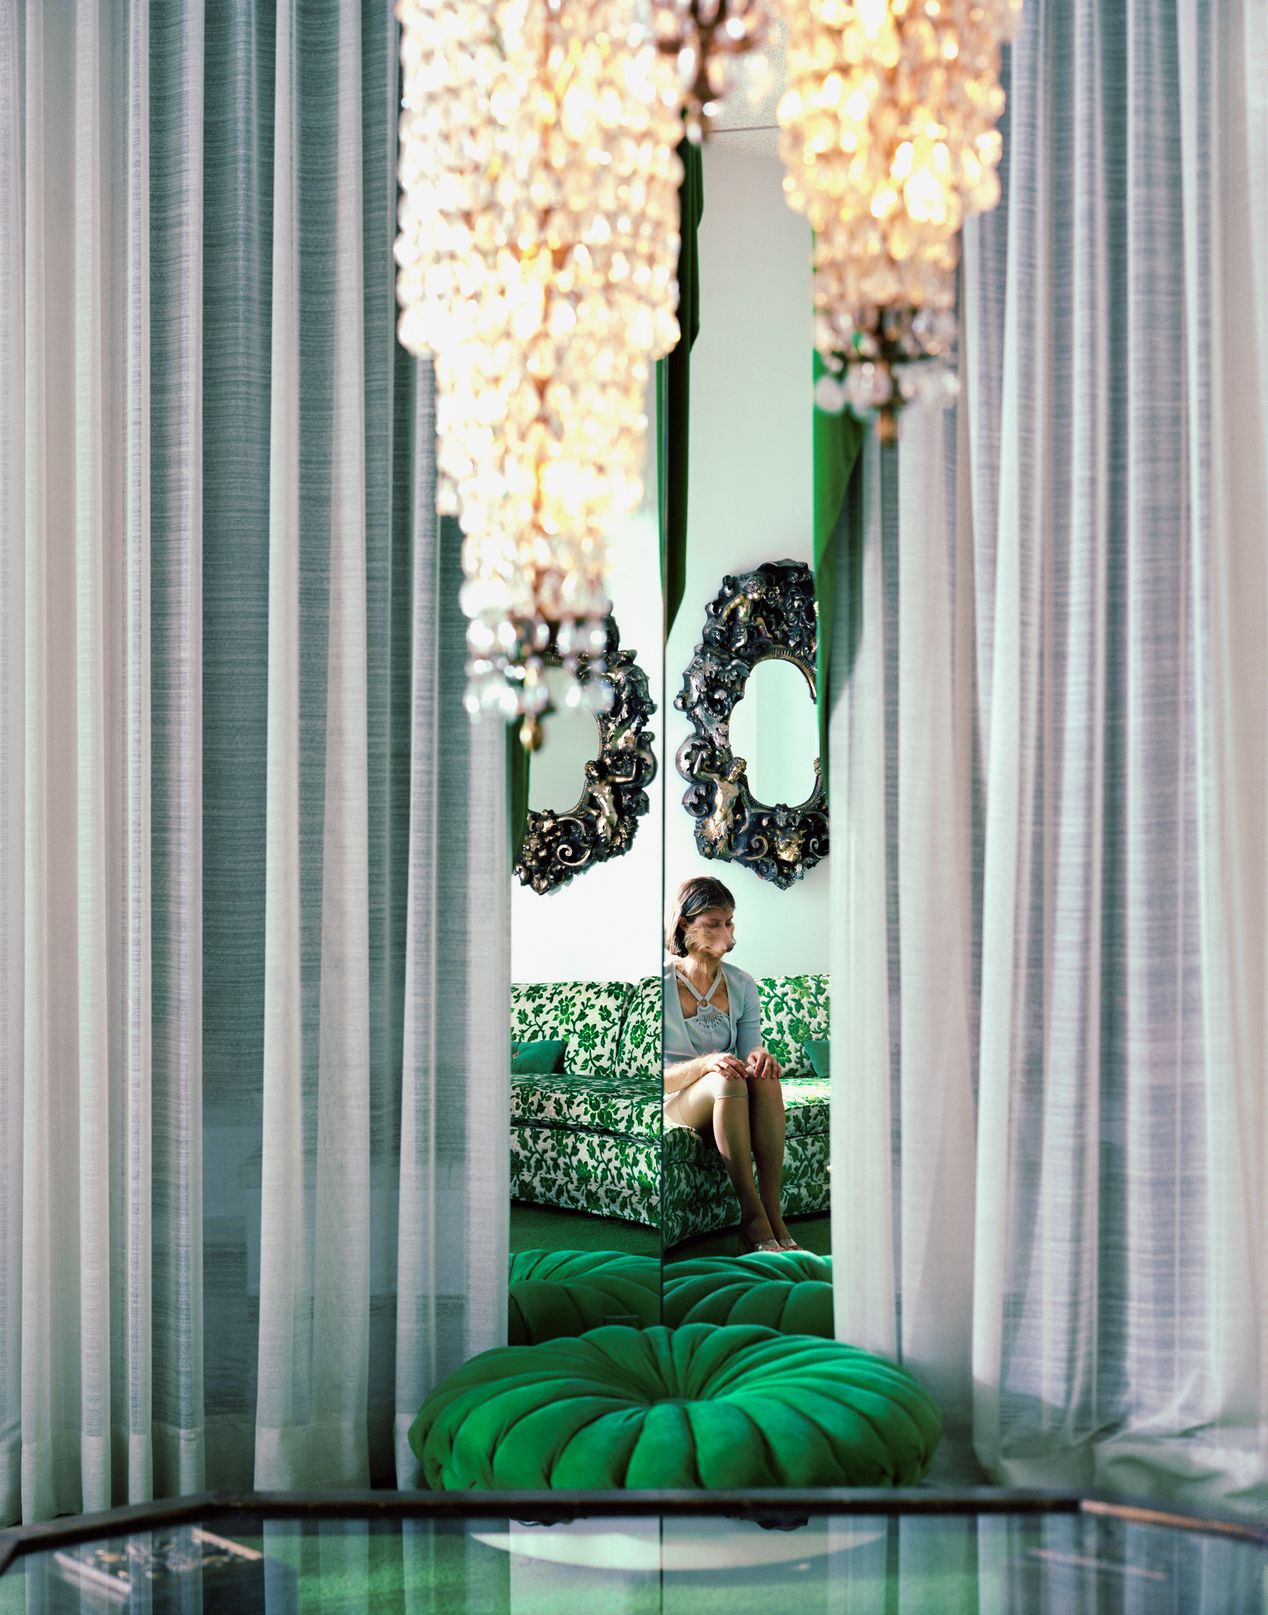 Reflection of part woman, part dog figure sitting on a patterned, green couch, art photography,art photography, Ilona Szwarc, contemporary Los Angeles artist.